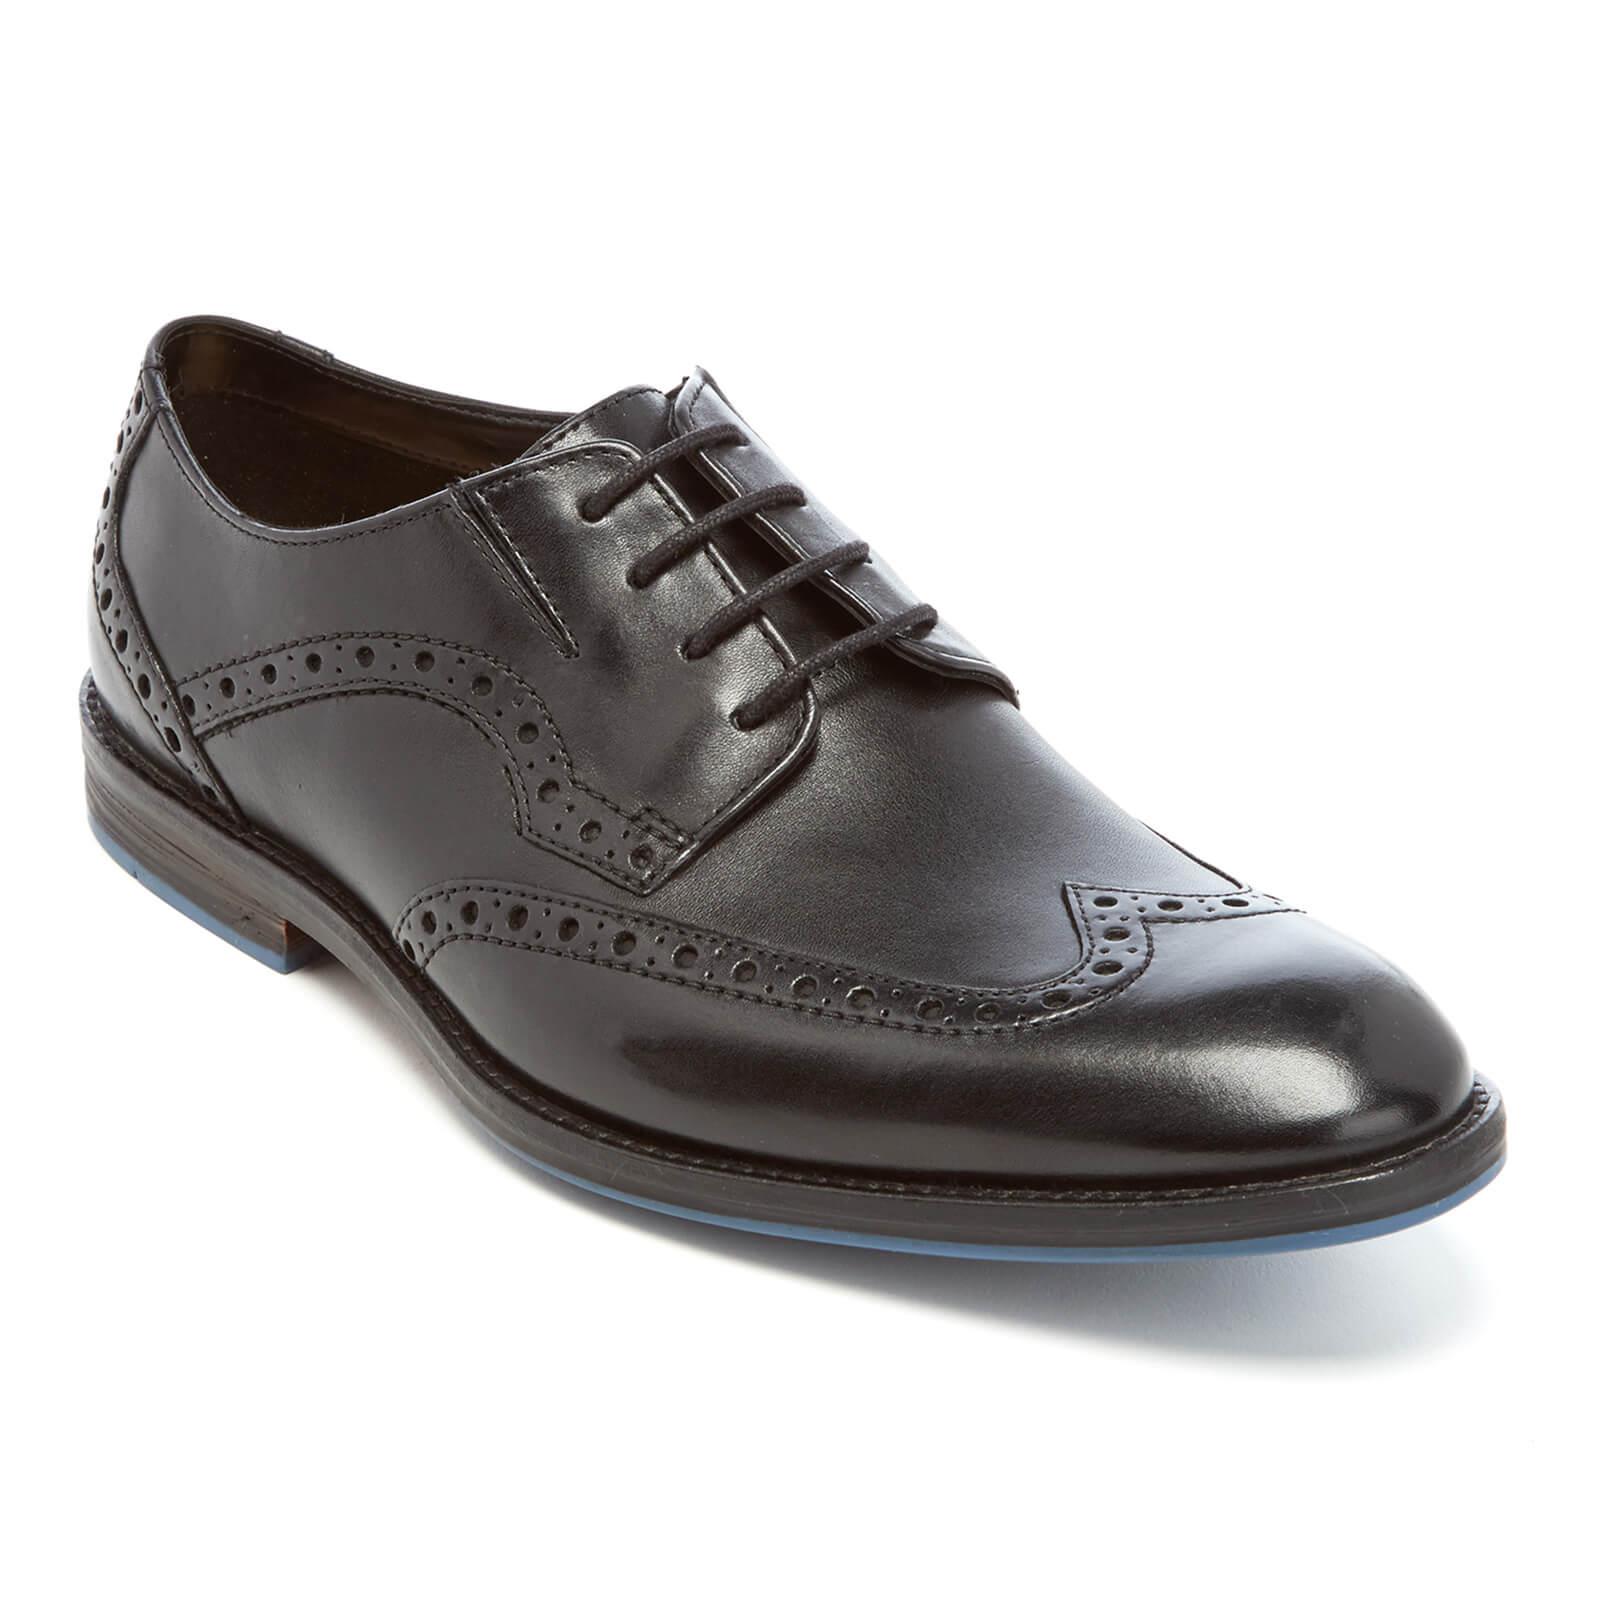 Clarks Prangley Limit Leather Brogues in Black for Men - Lyst